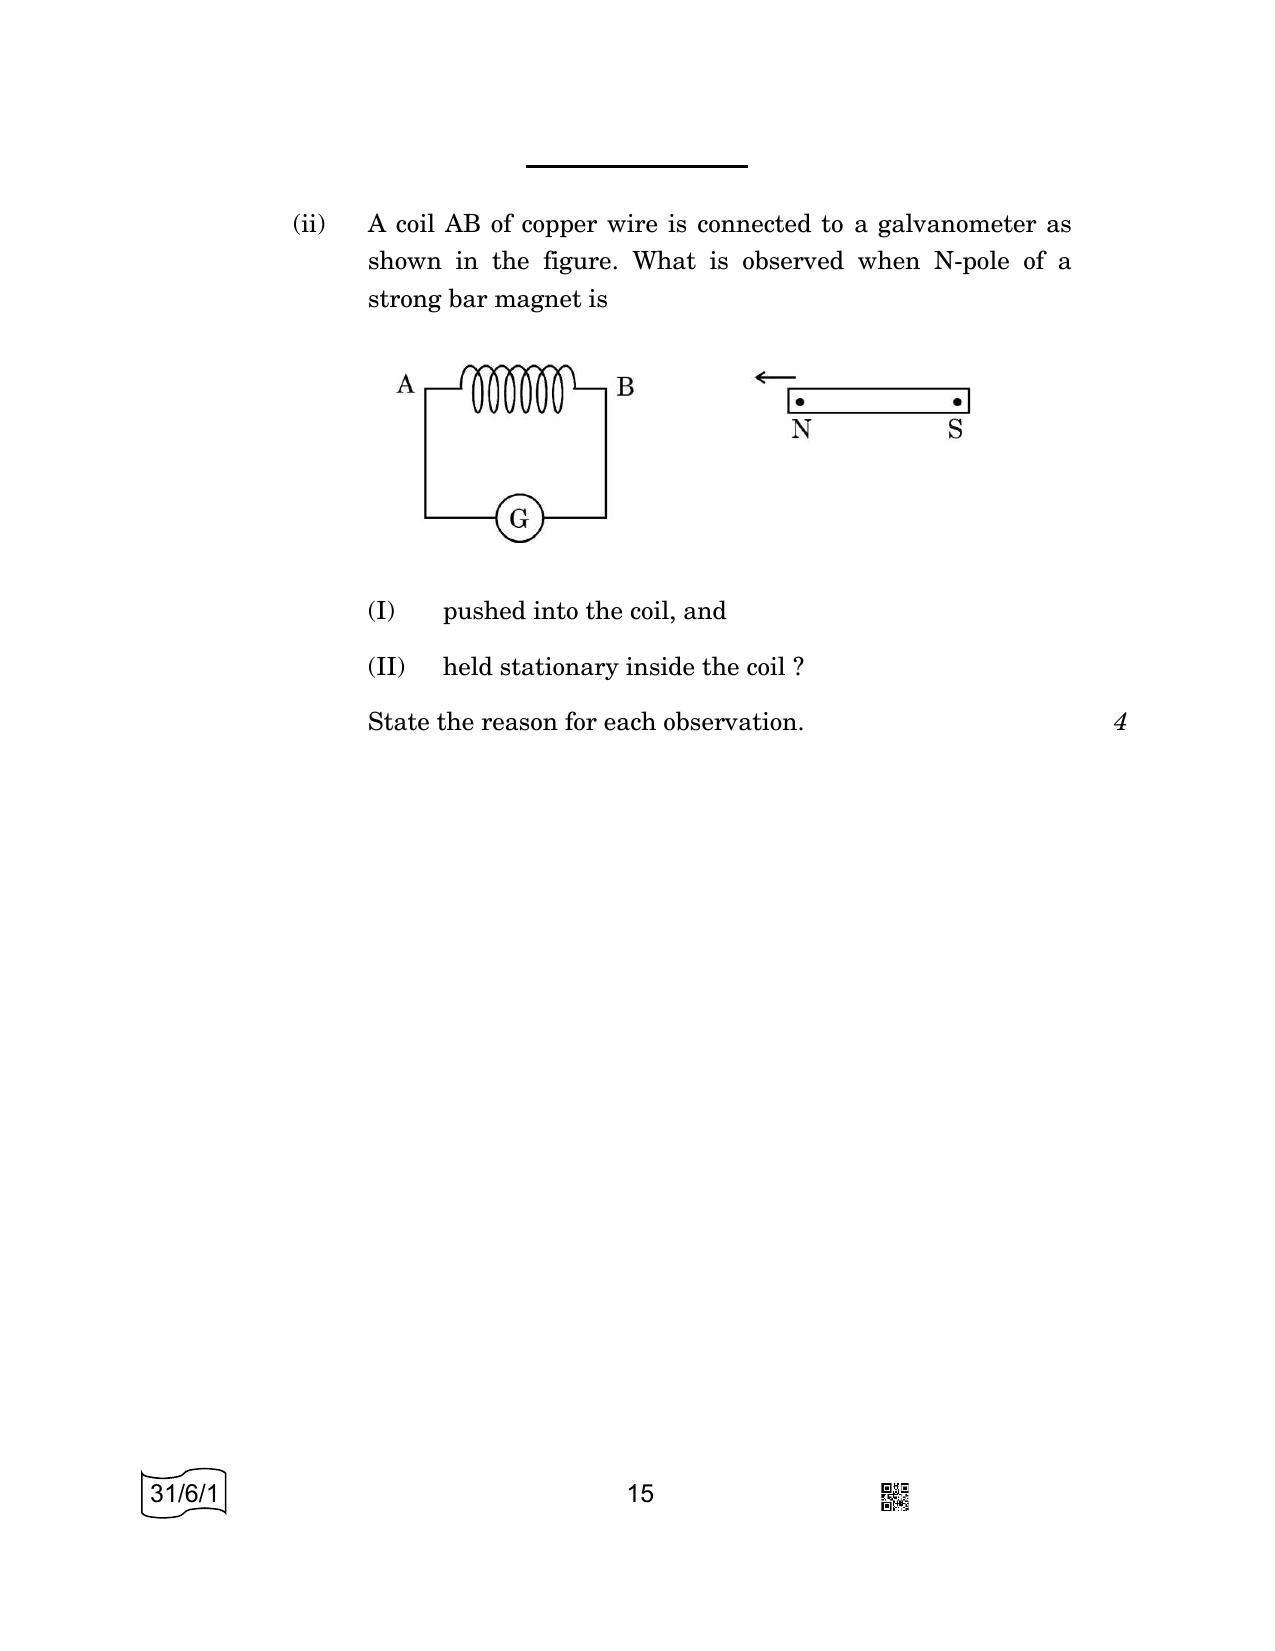 CBSE Class 10 31-6-1 SCIENCE 2022 Compartment Question Paper - Page 15